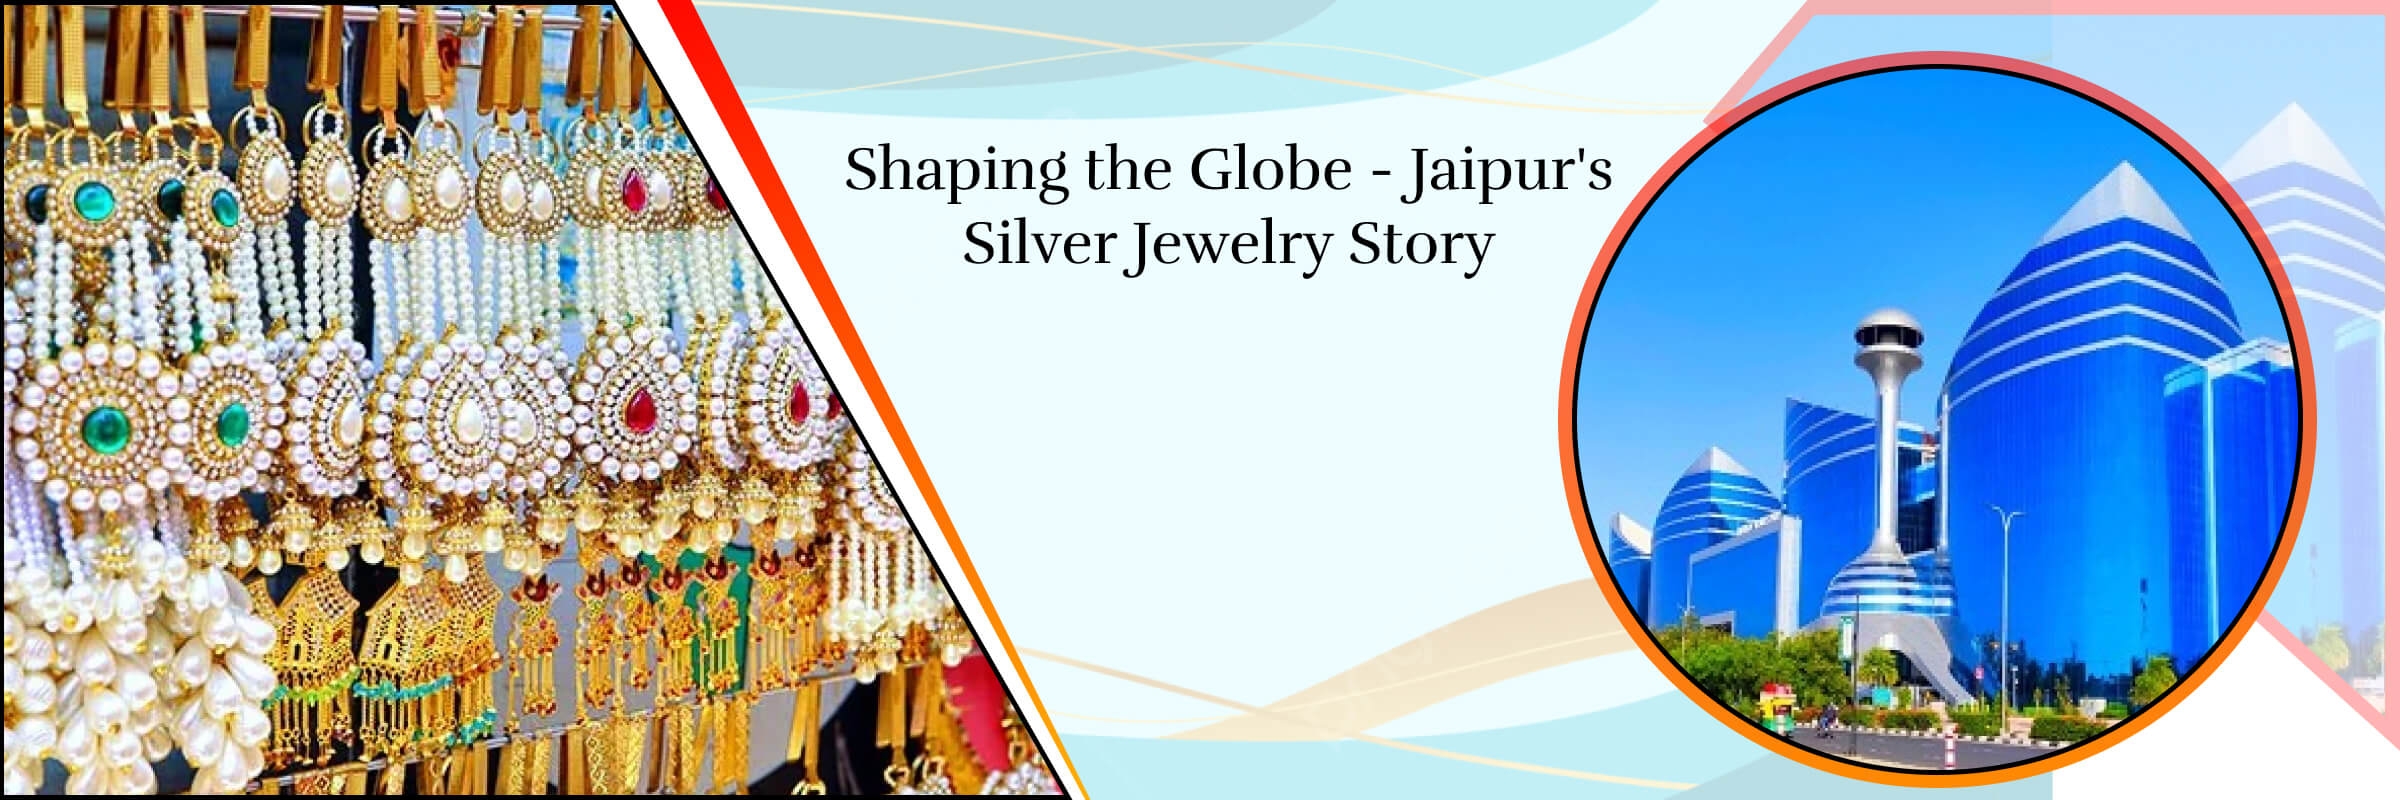 History of Jaipur Silver Jewelry